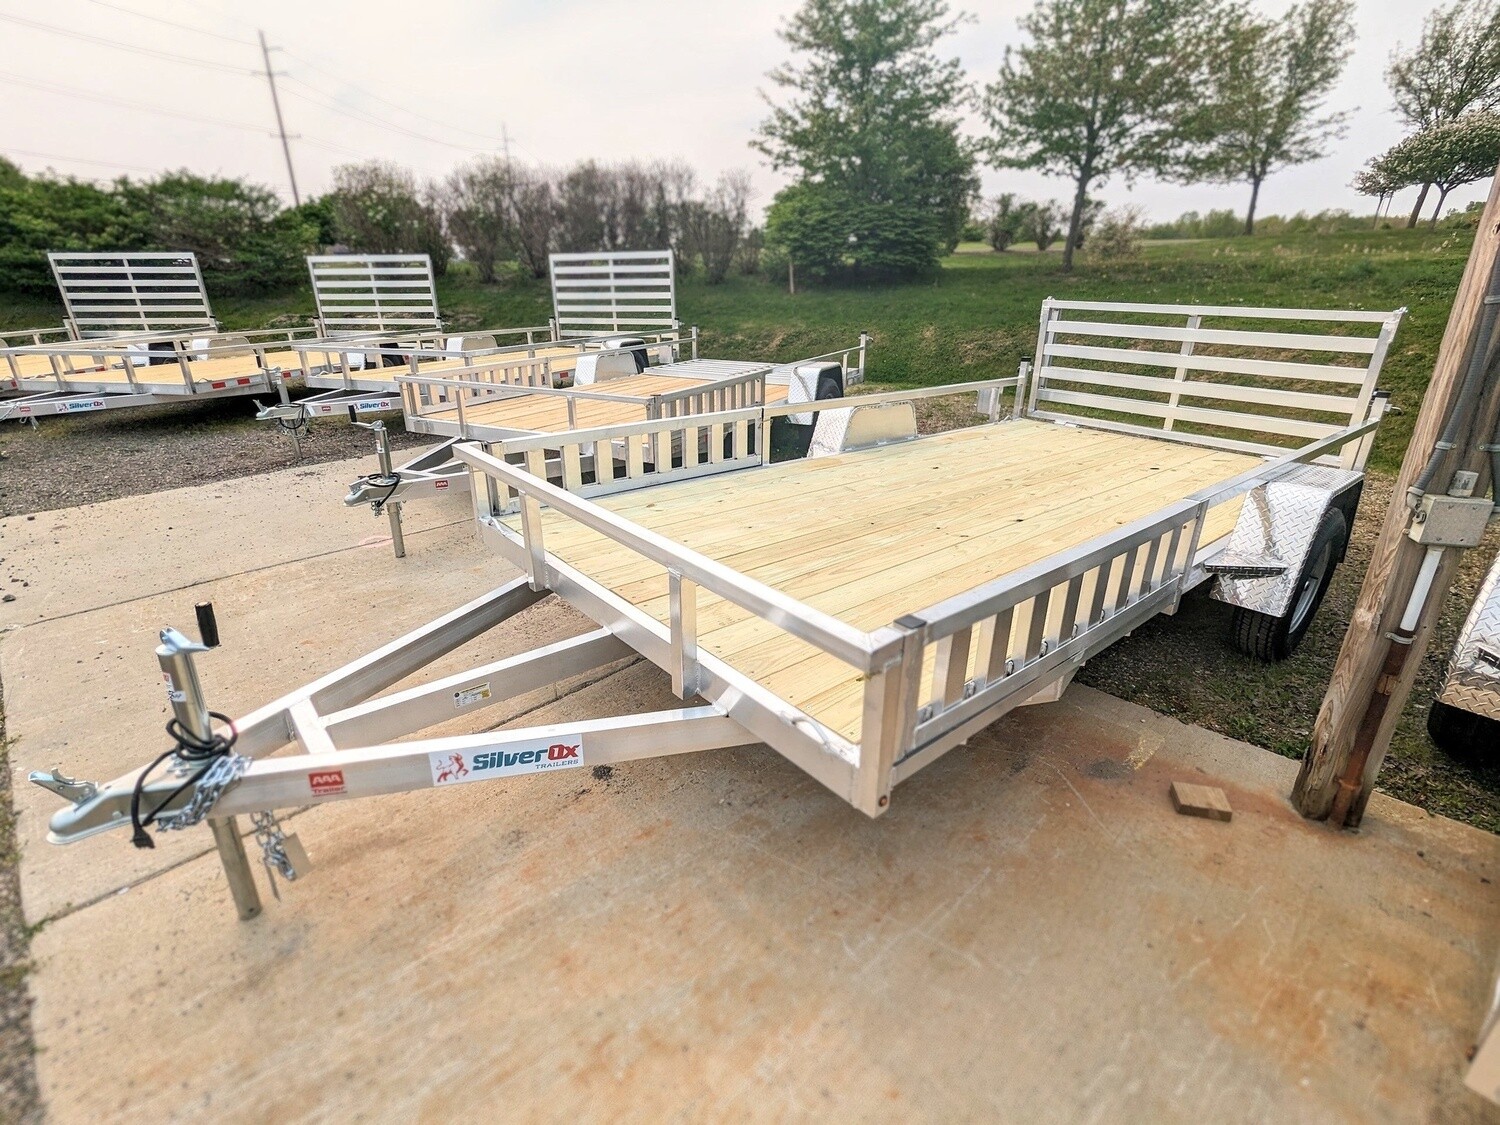 SILVER OX 7X14 SINGLE AXLE ALUMINUM UTILITY TRAILER WITH SIDE LOADING RAMPS & FOLDING GATE